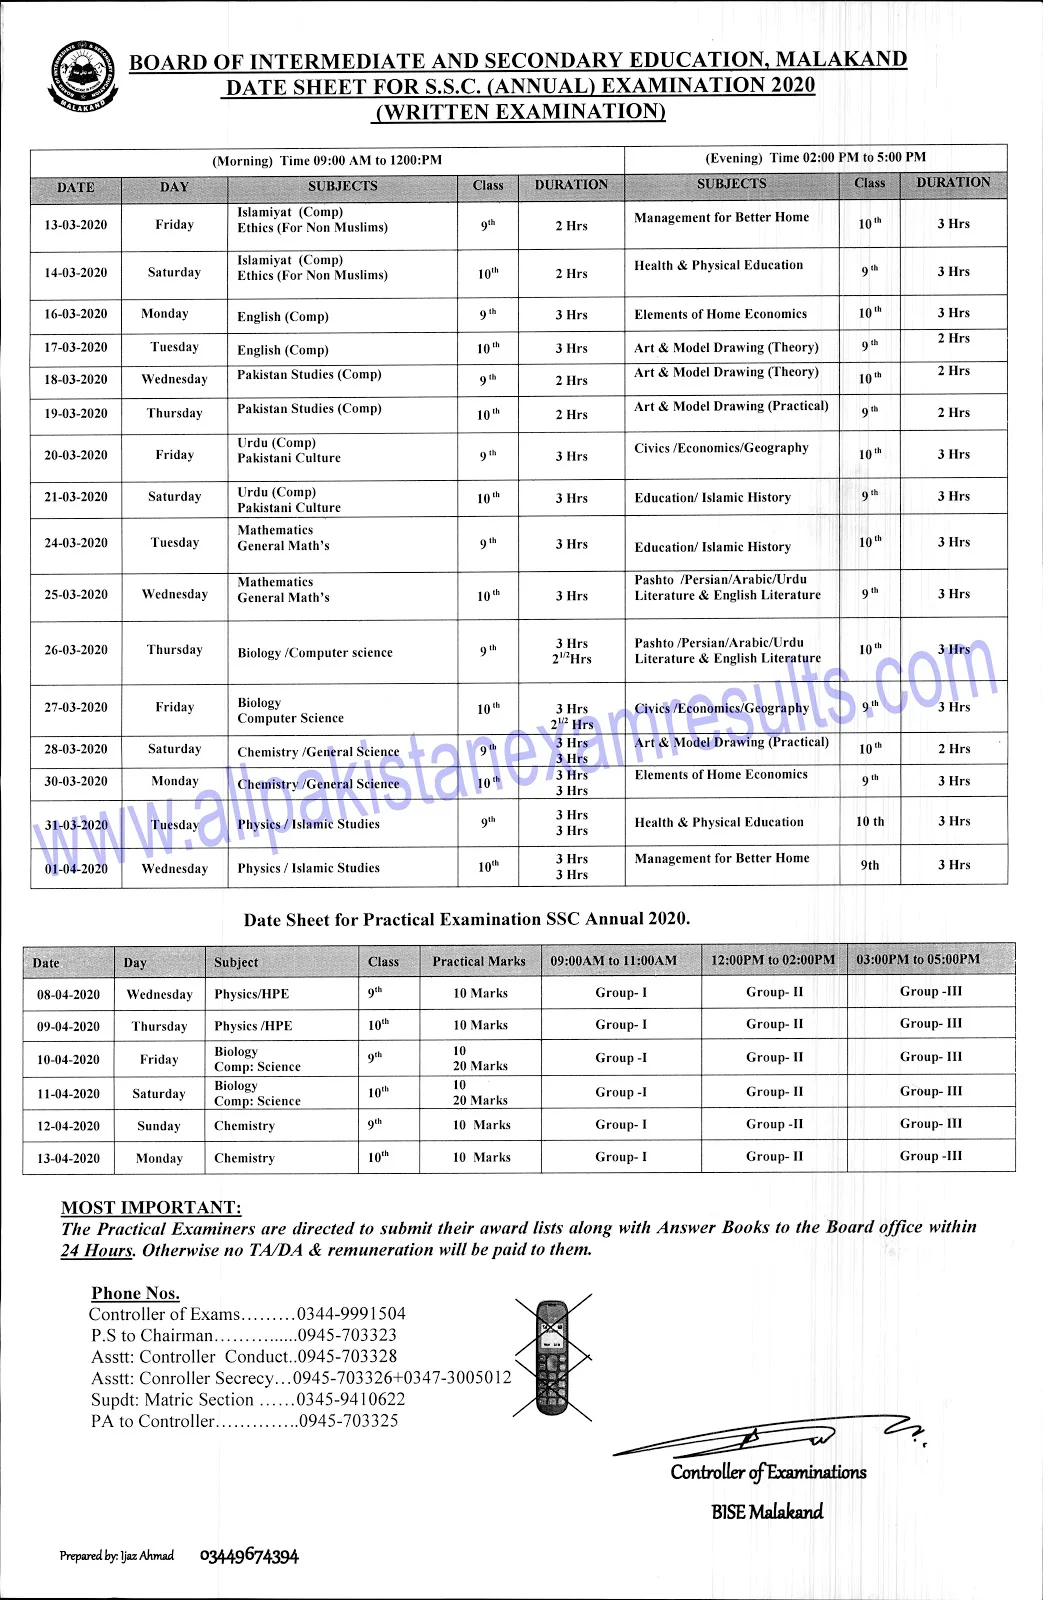 BISE Malakand 9th and 10th Date Sheet 2020